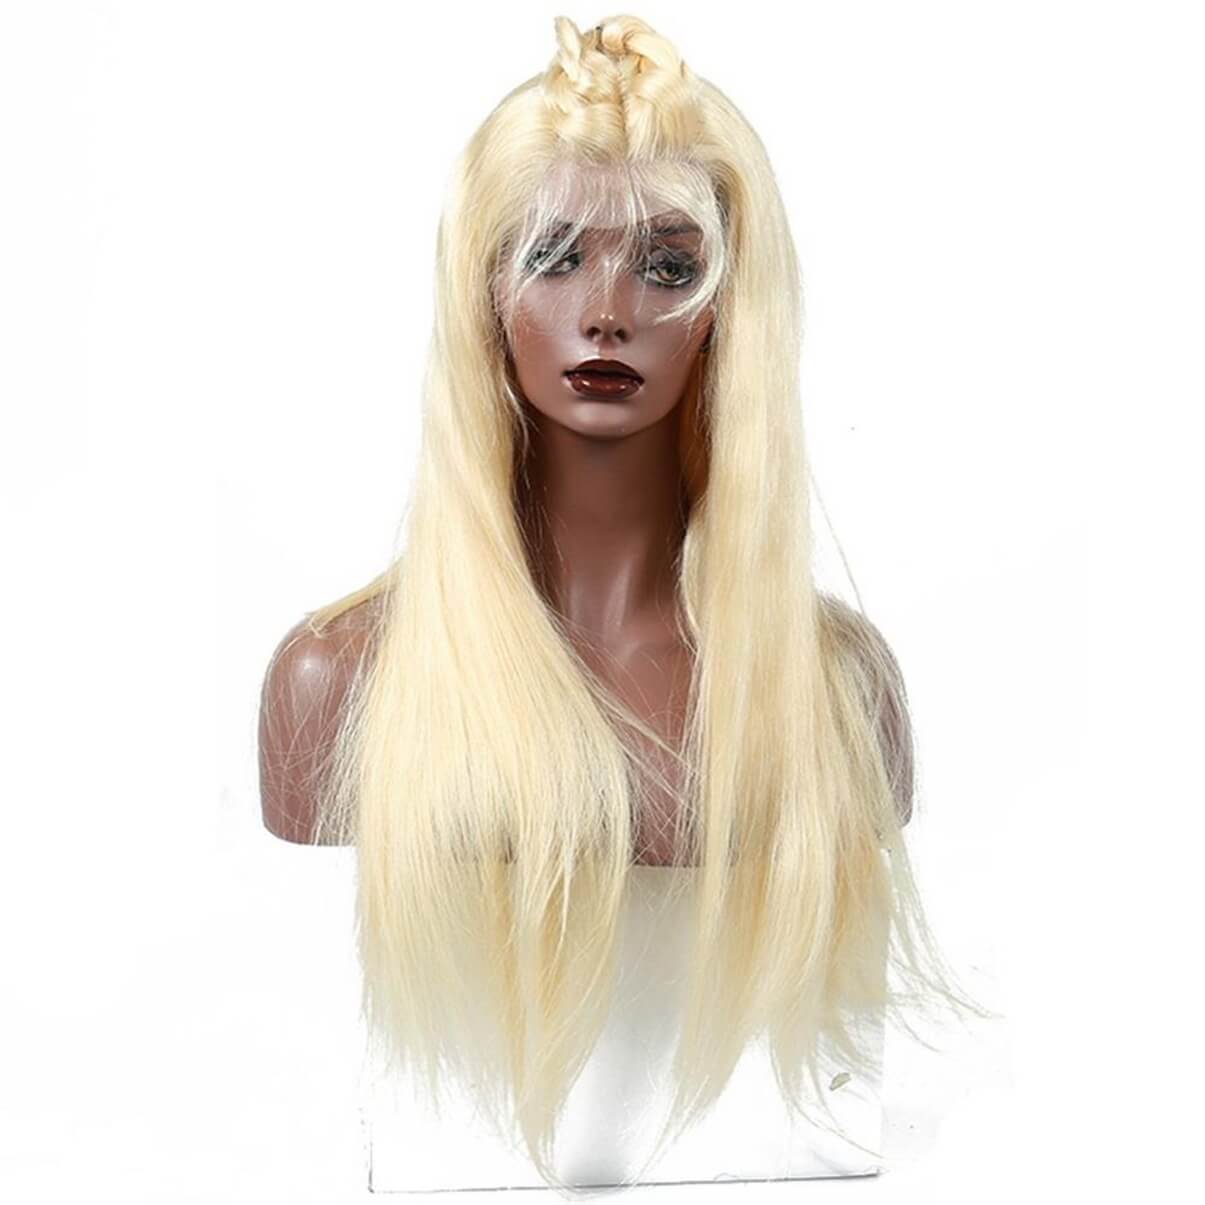 Lakihair 613 Blonde Color Virgin Brazilian Straight Lace Wigs Pre Plucked Glueless Lace Front Human Hair Wigs